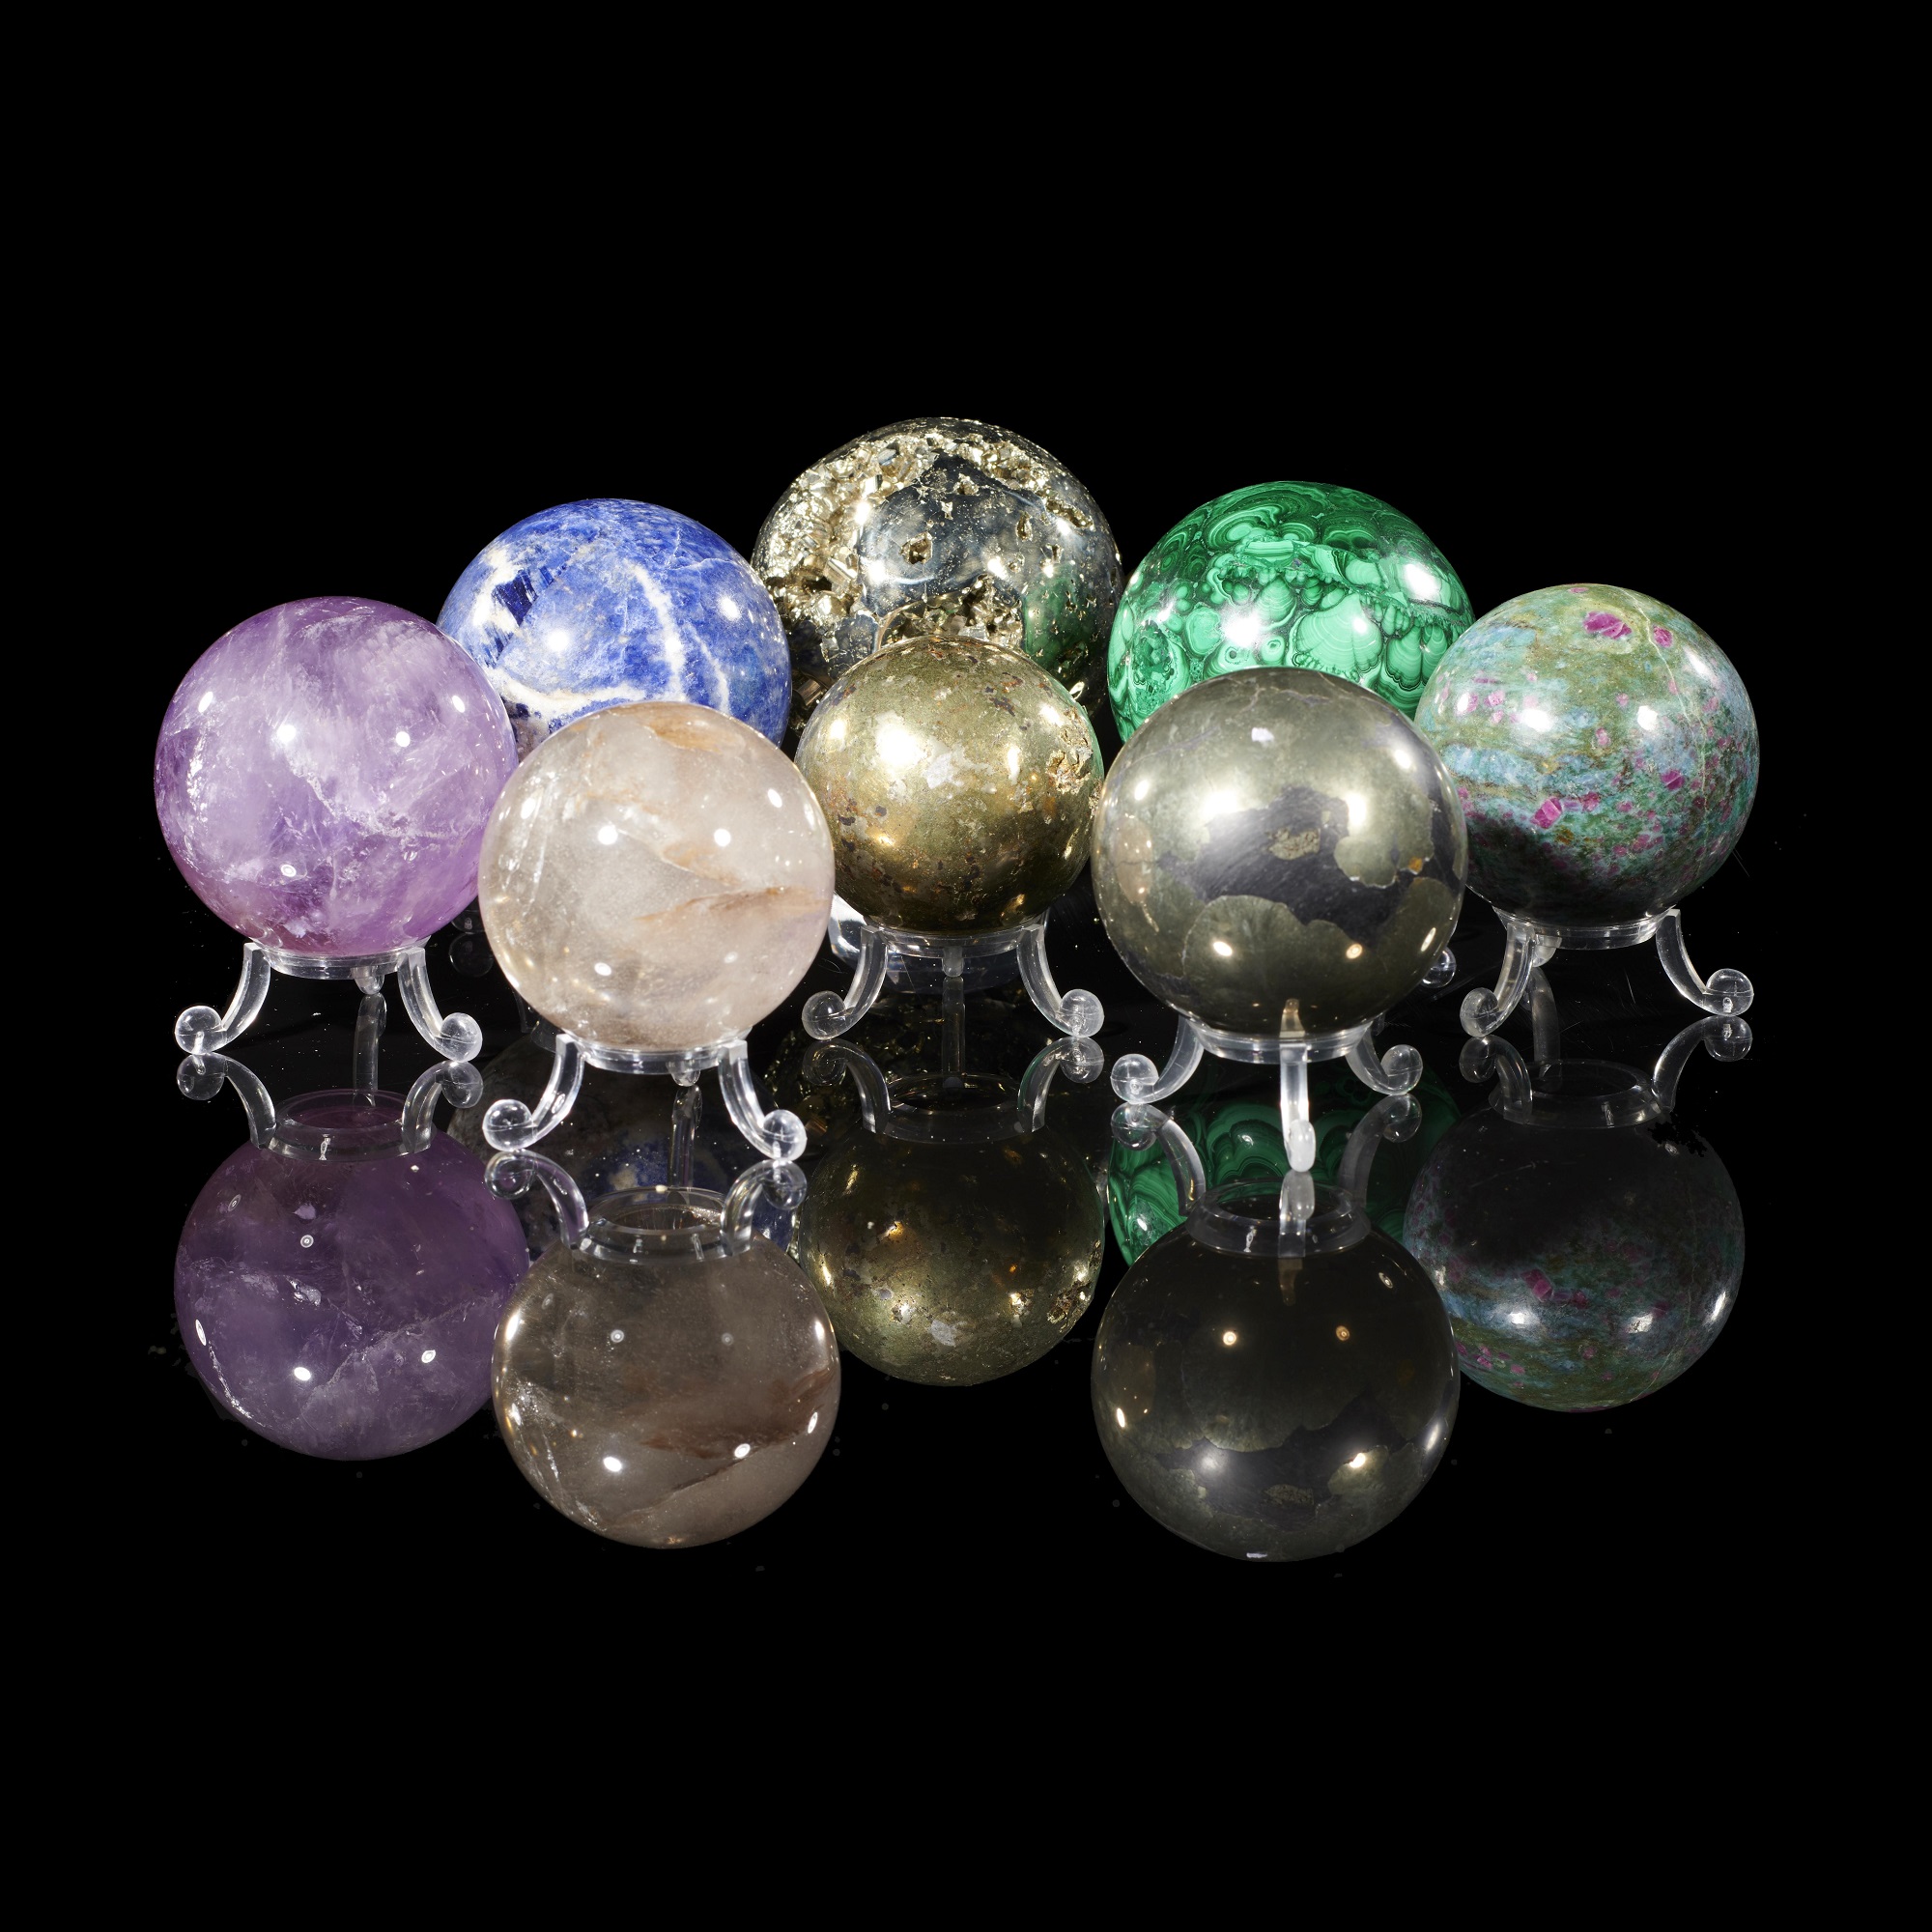 A collection of eight semi-precious stone spheres including malachite, pyrite, sodalite, amethyst, quartz, ruby in fuchsite the largest 7cm